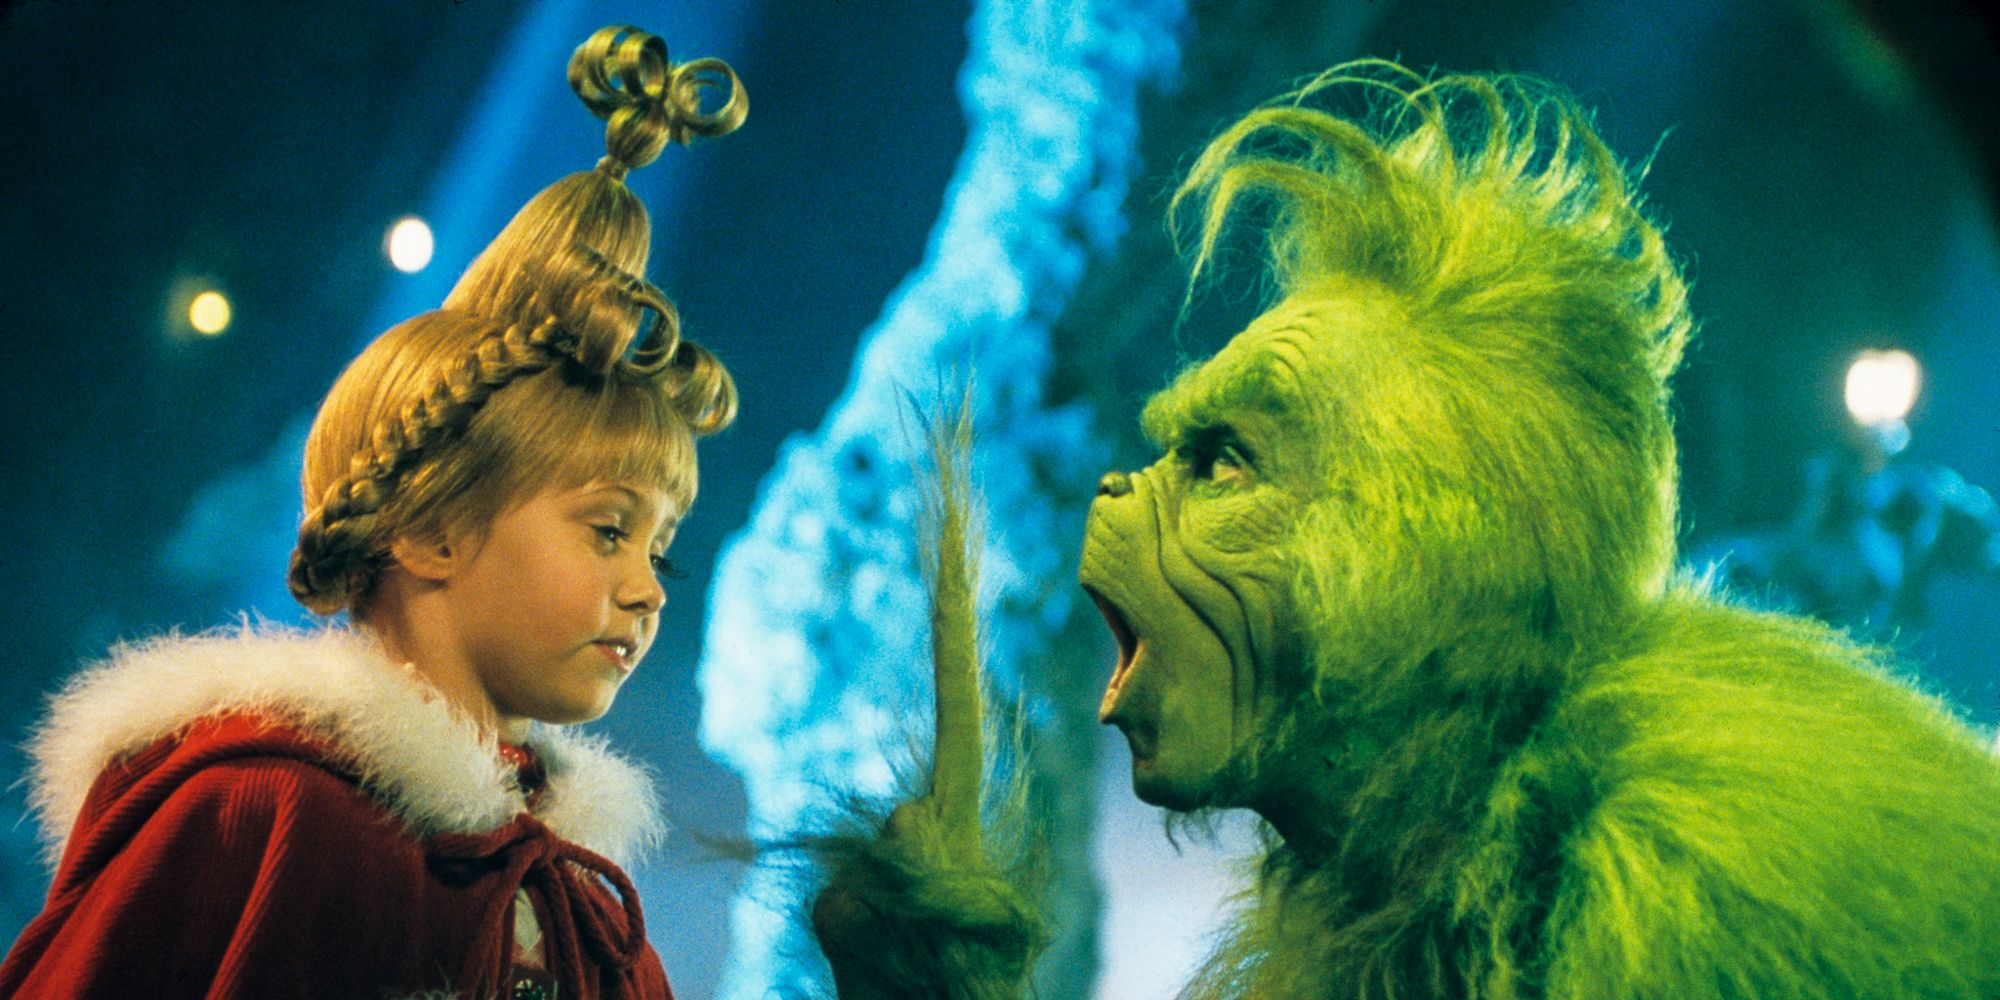 The Grinch scolds Cindy Lou Who after she enters his home